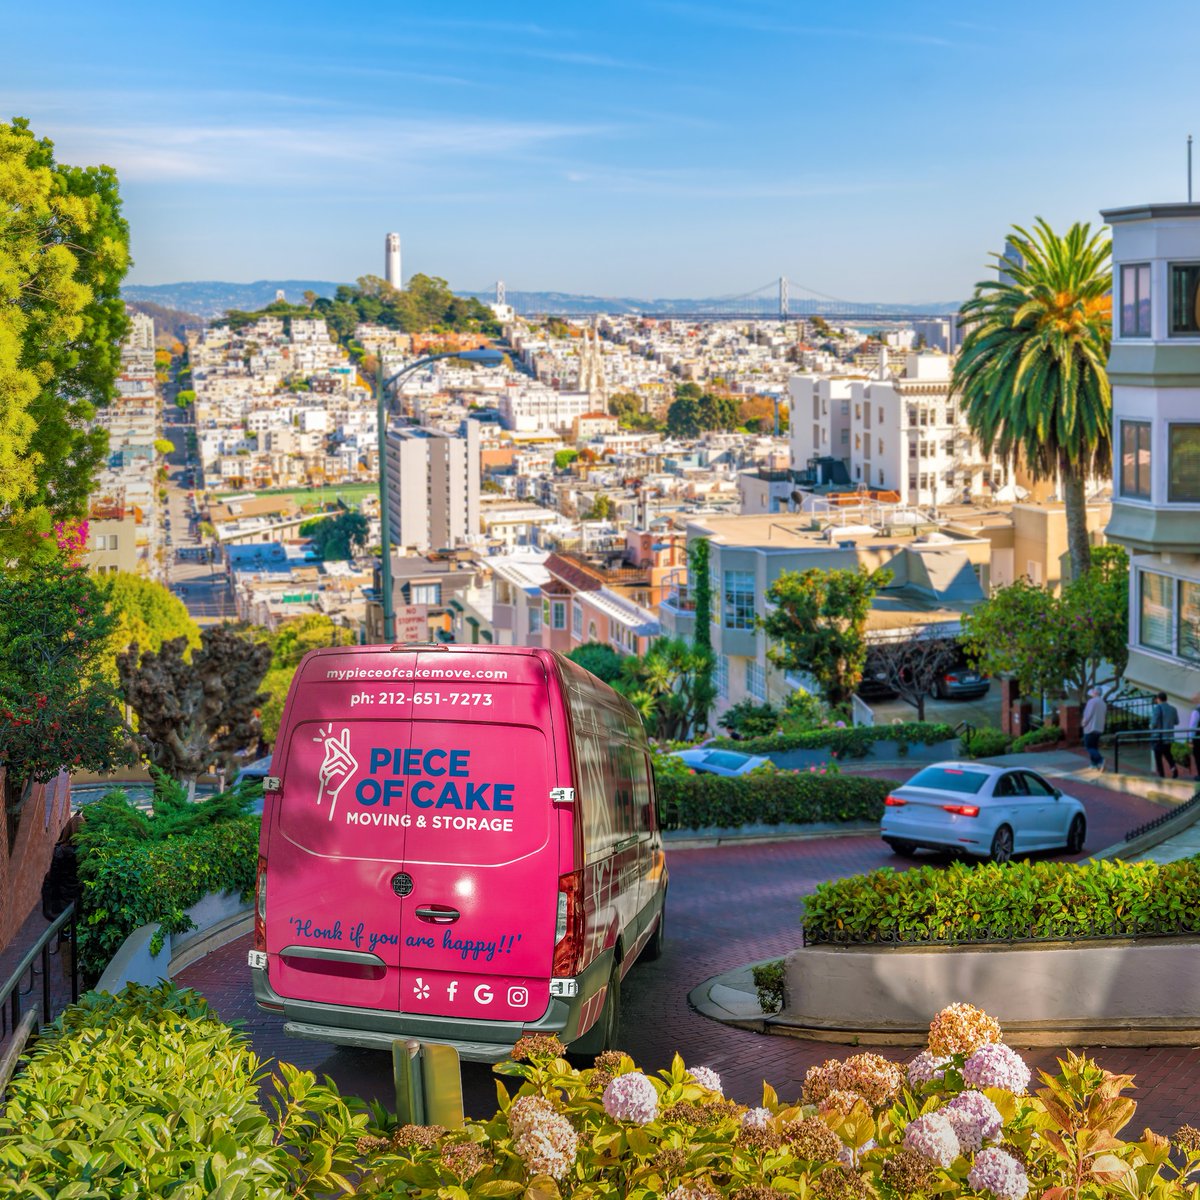 We offer our reliable and trusted local and out of state moving services across the West Coast 😎 Make your next move a Piece of Cake! 🍰 
#mypieceofcakemove #pieceofcakemoving #localmovers #californiamovers #longdistancemovers #movingnewyork #sanfrancisco #sanfranciscomovers